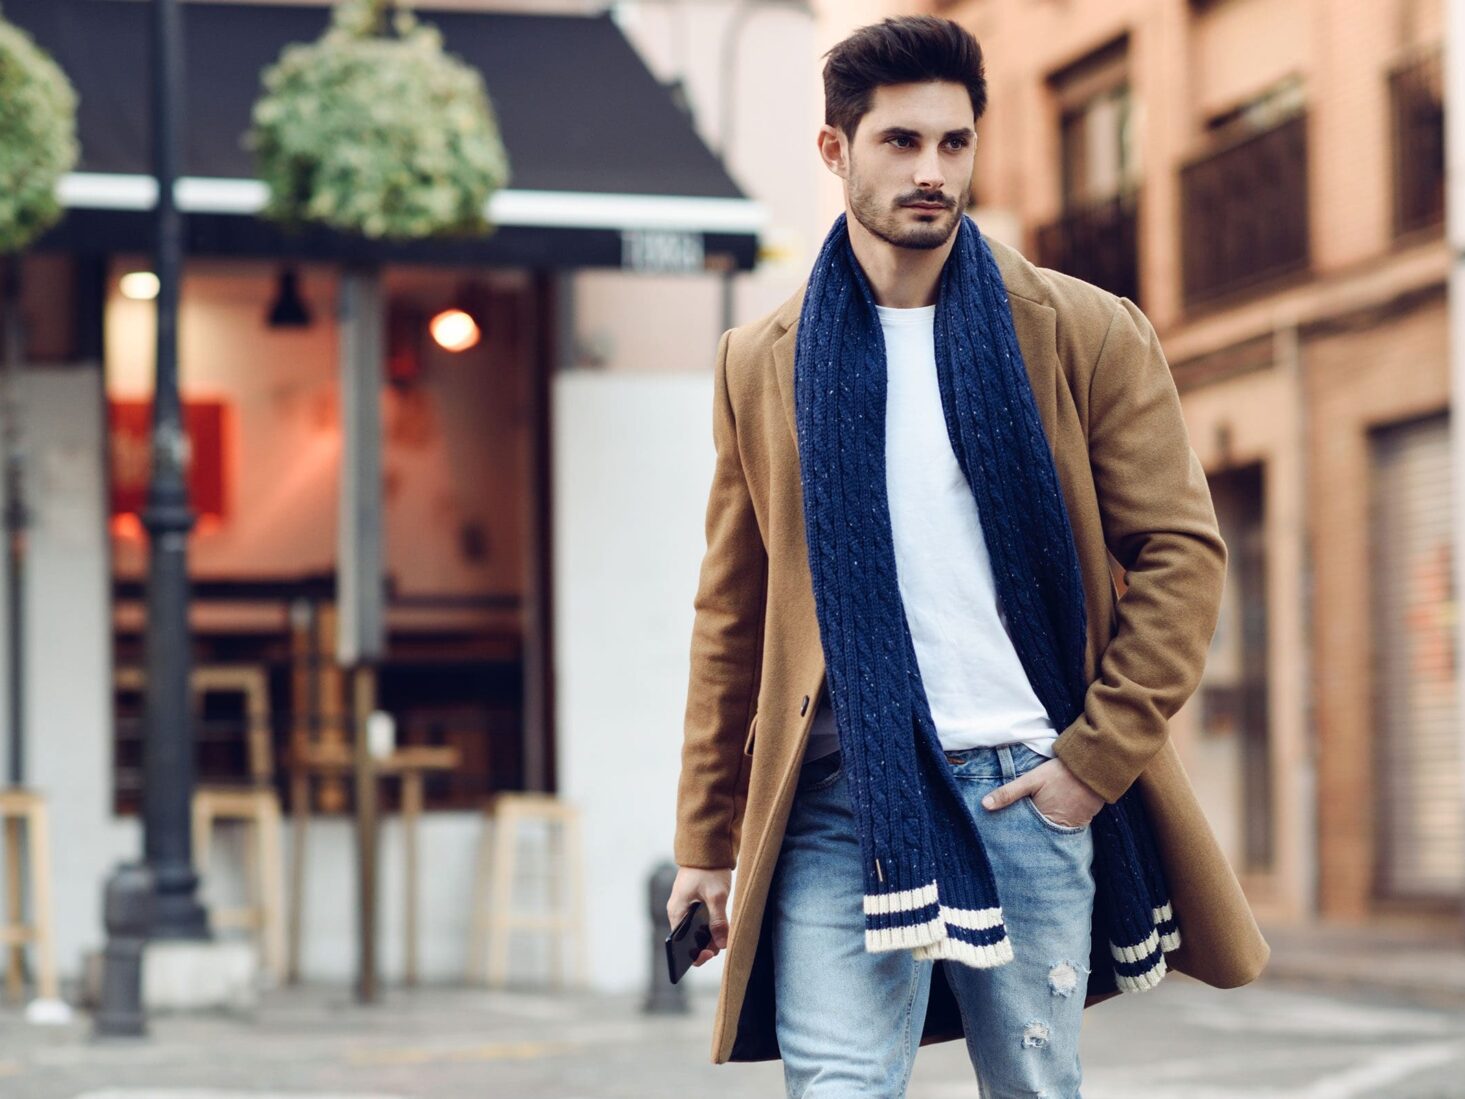 How To Wear A Scarf For Men The Ultimate Guide Soxy | vlr.eng.br